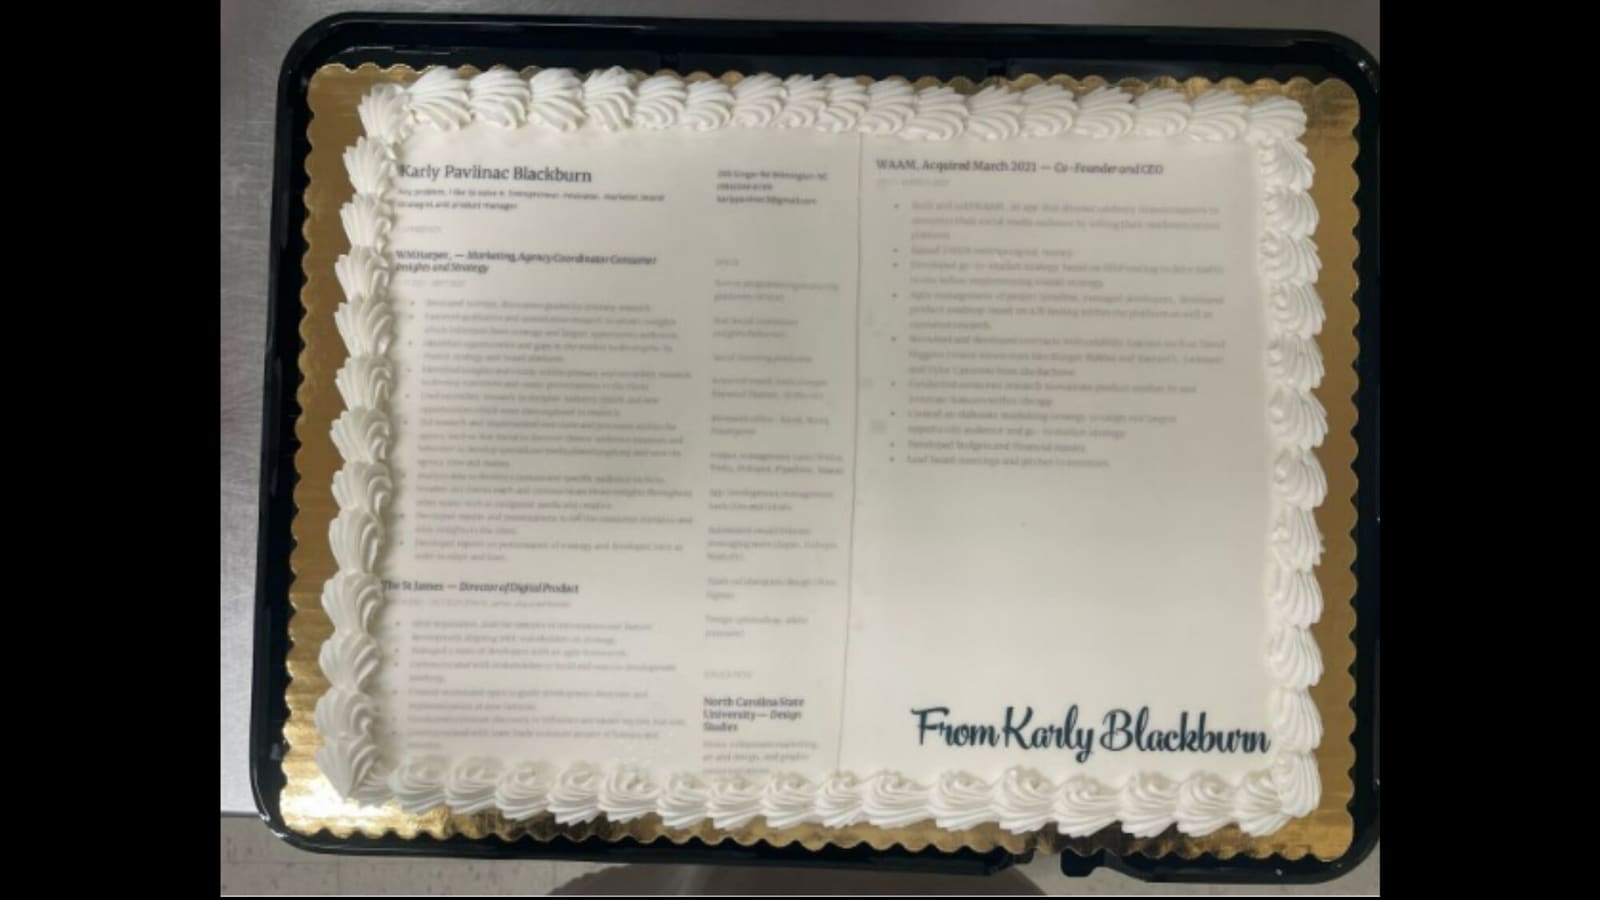 embudo Posibilidades Rápido Woman prints resume out on a cake and sends it to Nike. See viral LinkedIn  post | Trending - Hindustan Times